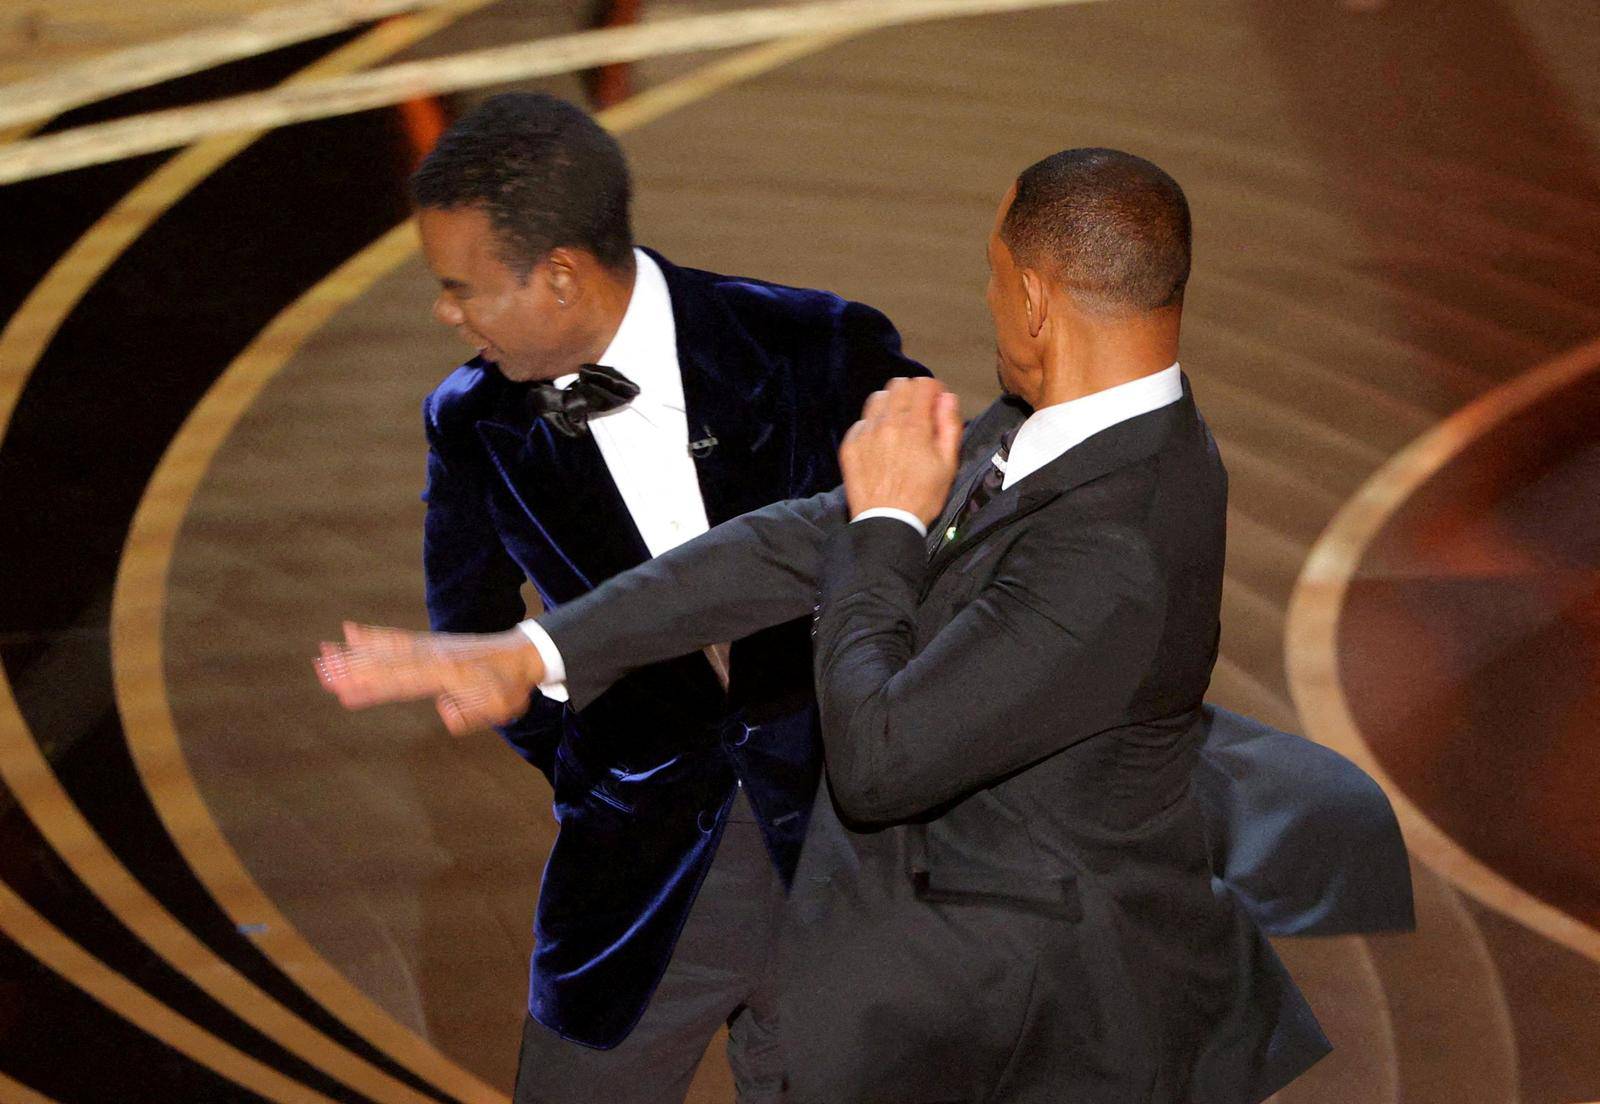 FILE PHOTO: Will Smith hits Chris Rock onstage during the 94th Academy Awards in Hollywood